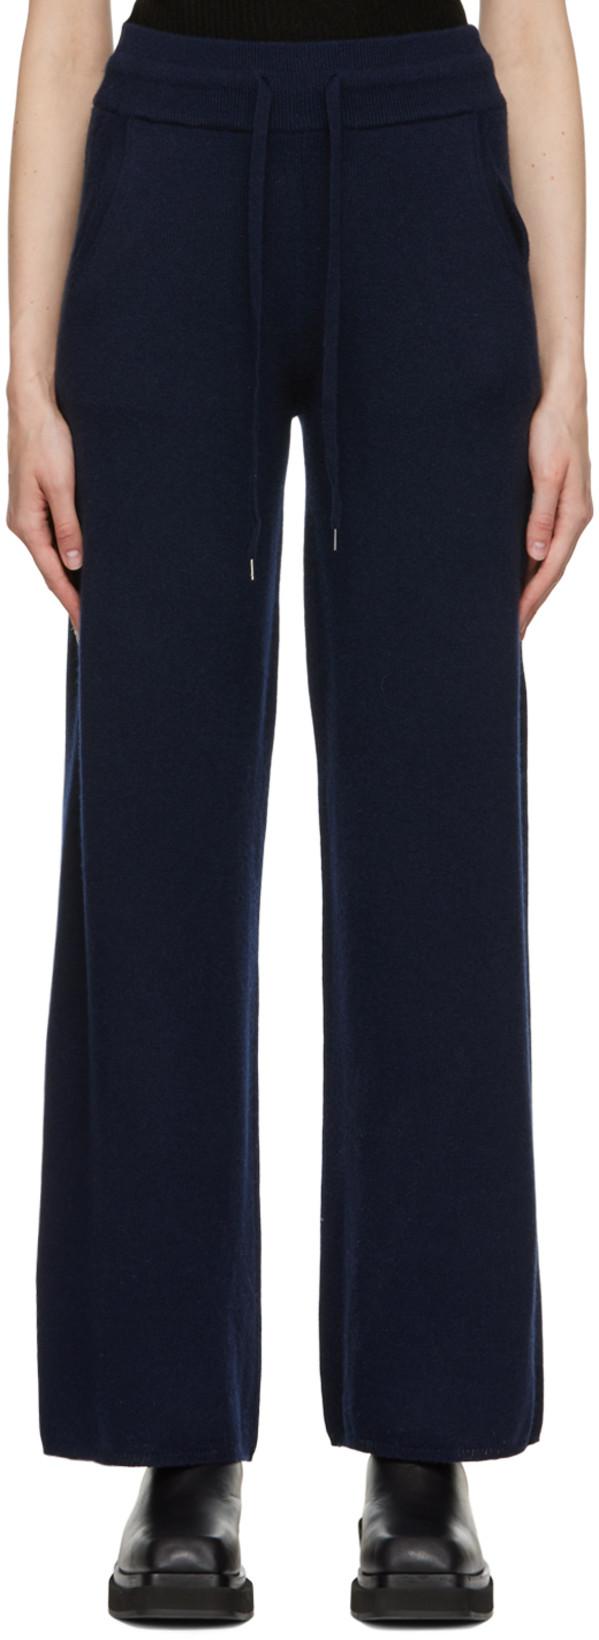 Navy Erica Lounge Pants by 360CASHMERE